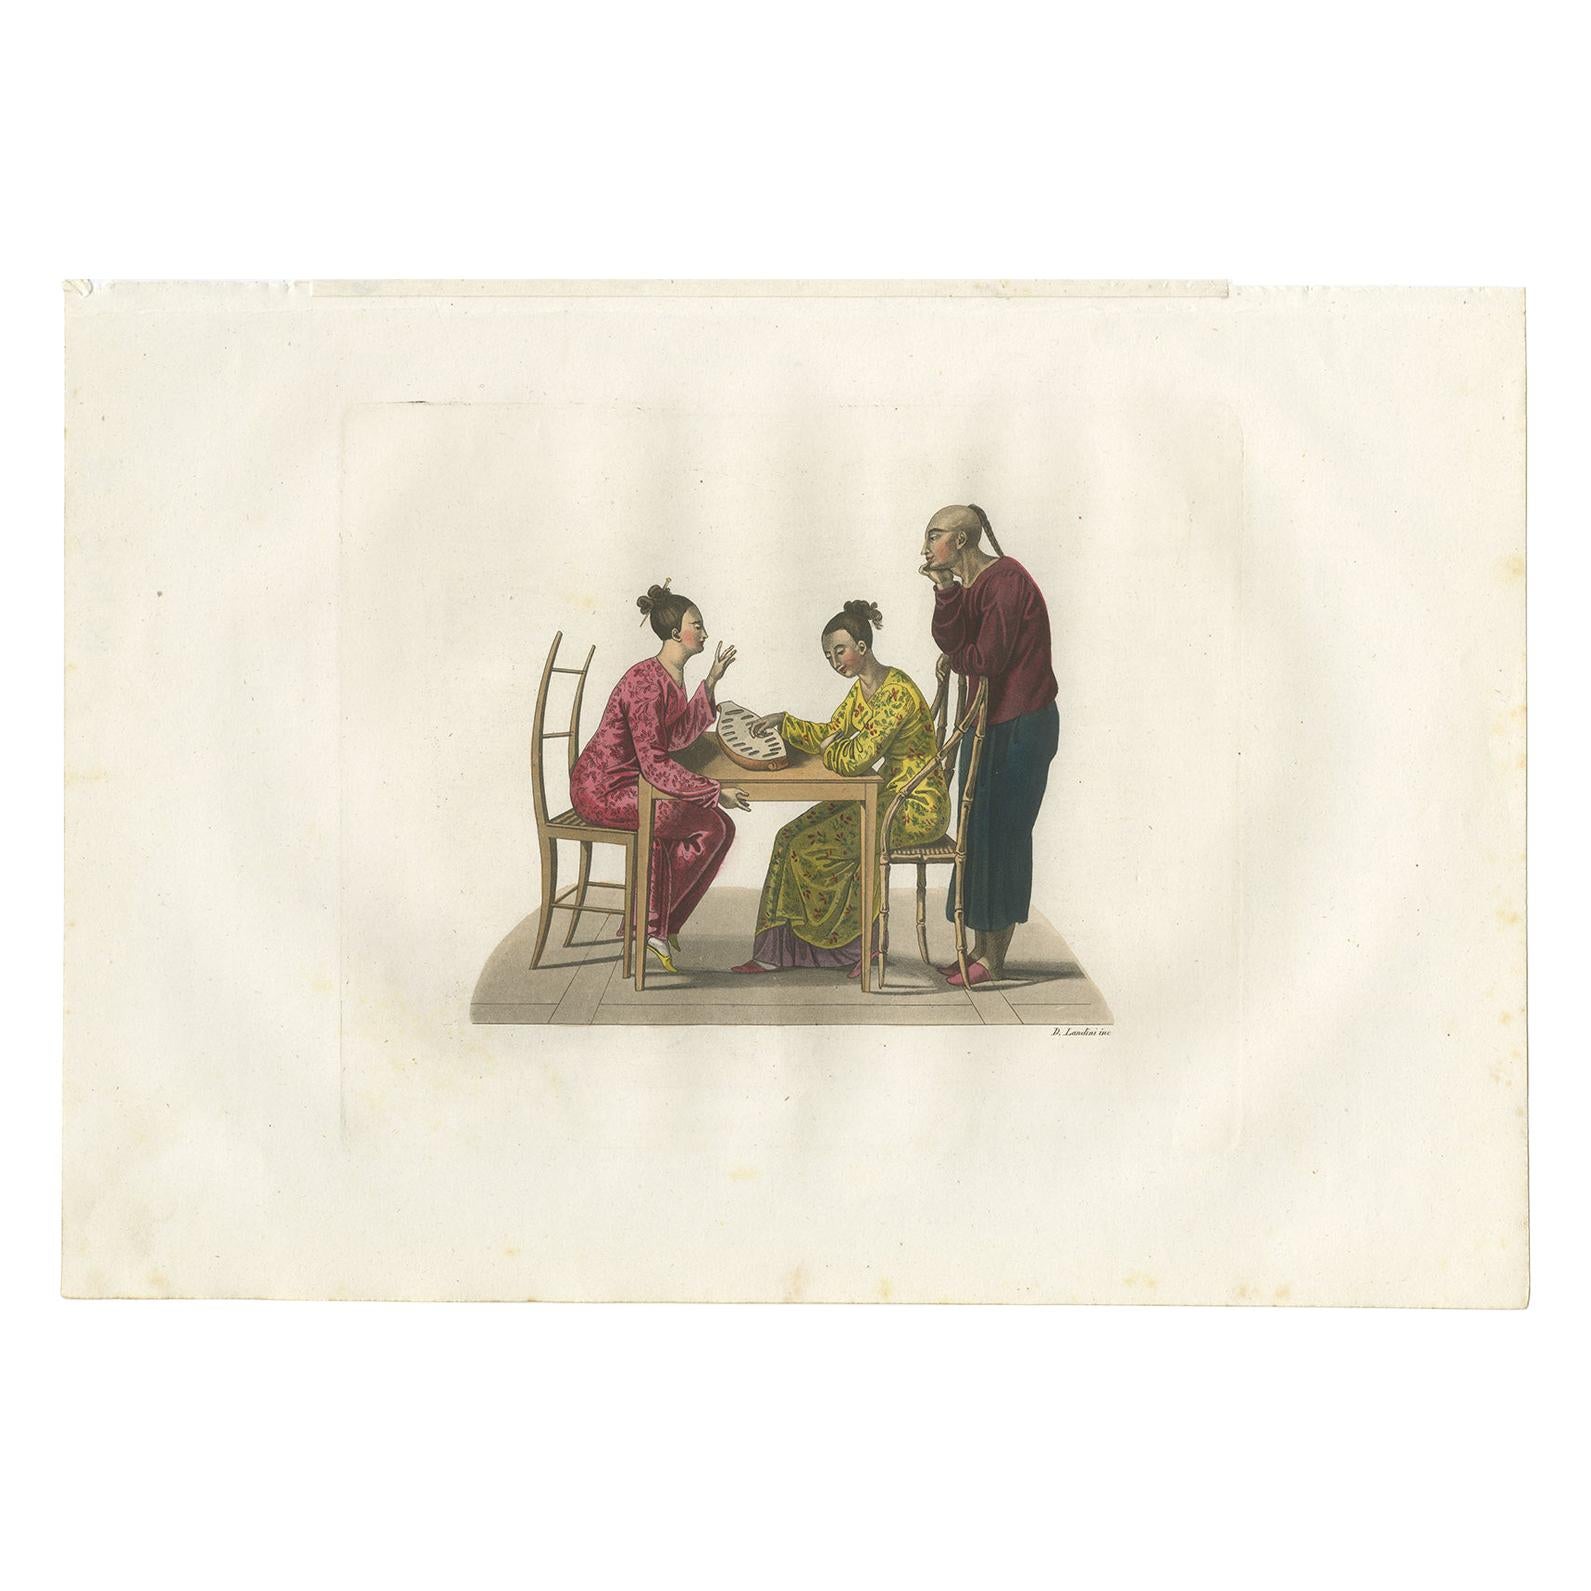 Antique Print of a Chinese Family Playing an Instrument by Ferrario '1831'